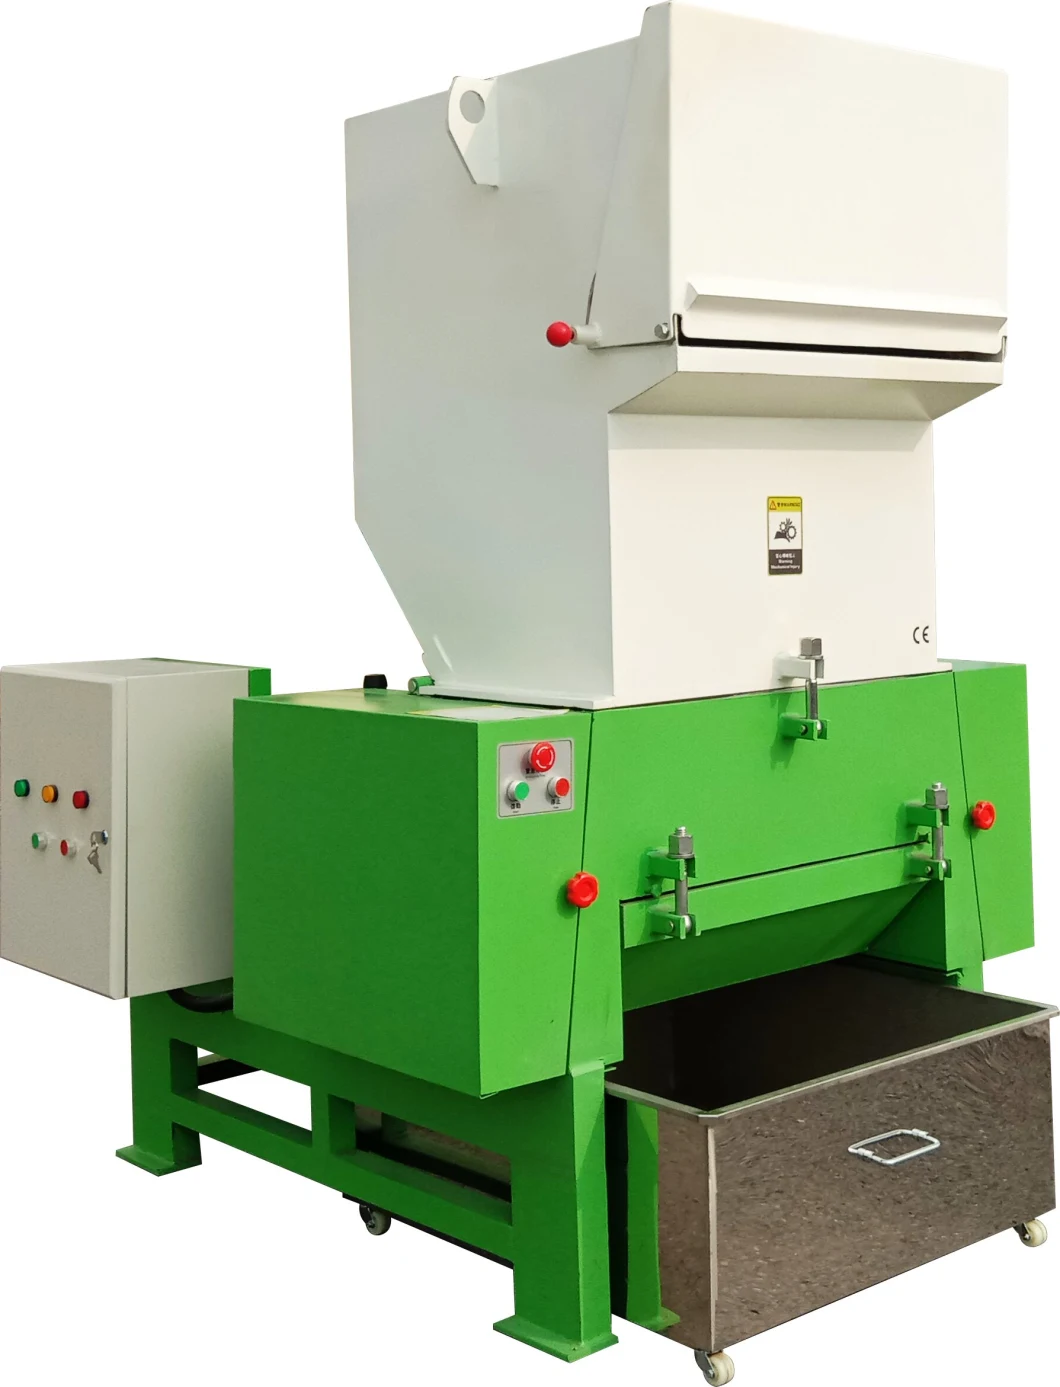 Beiman 20HP Waste Plastic Scrap Crushing Machine Plastic Recycling Crusher for Bottle and Barrel